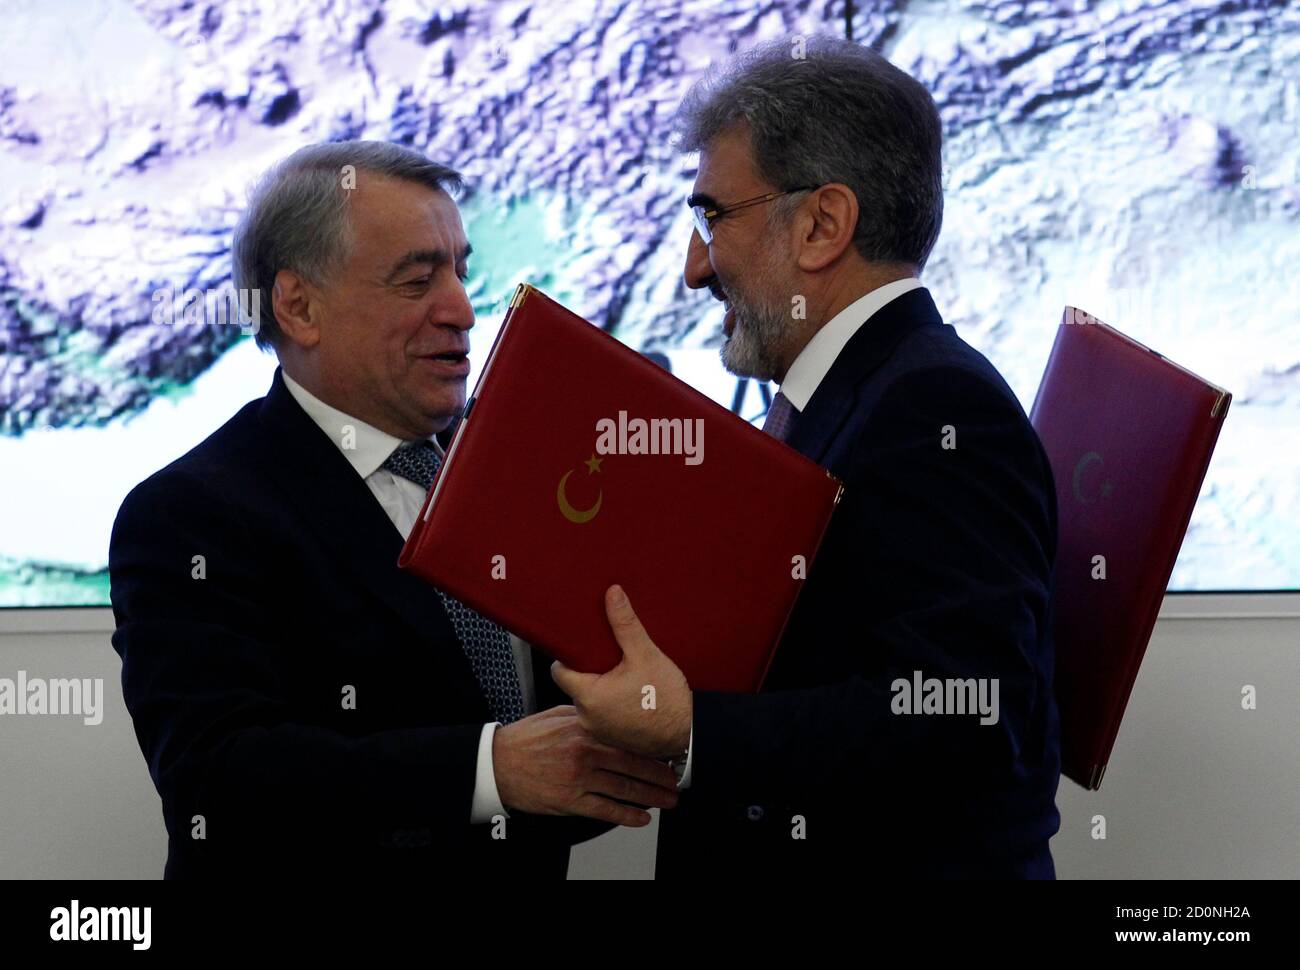 Azeri Energy Minister Natik Aliev (L) and Turkish Energy Minister Taner  Yildiz attend the signing ceremony of The Trans-Anatolian gas pipeline  project in Ankara December 26, 2011. The Trans-Anatolian gas pipeline  project,